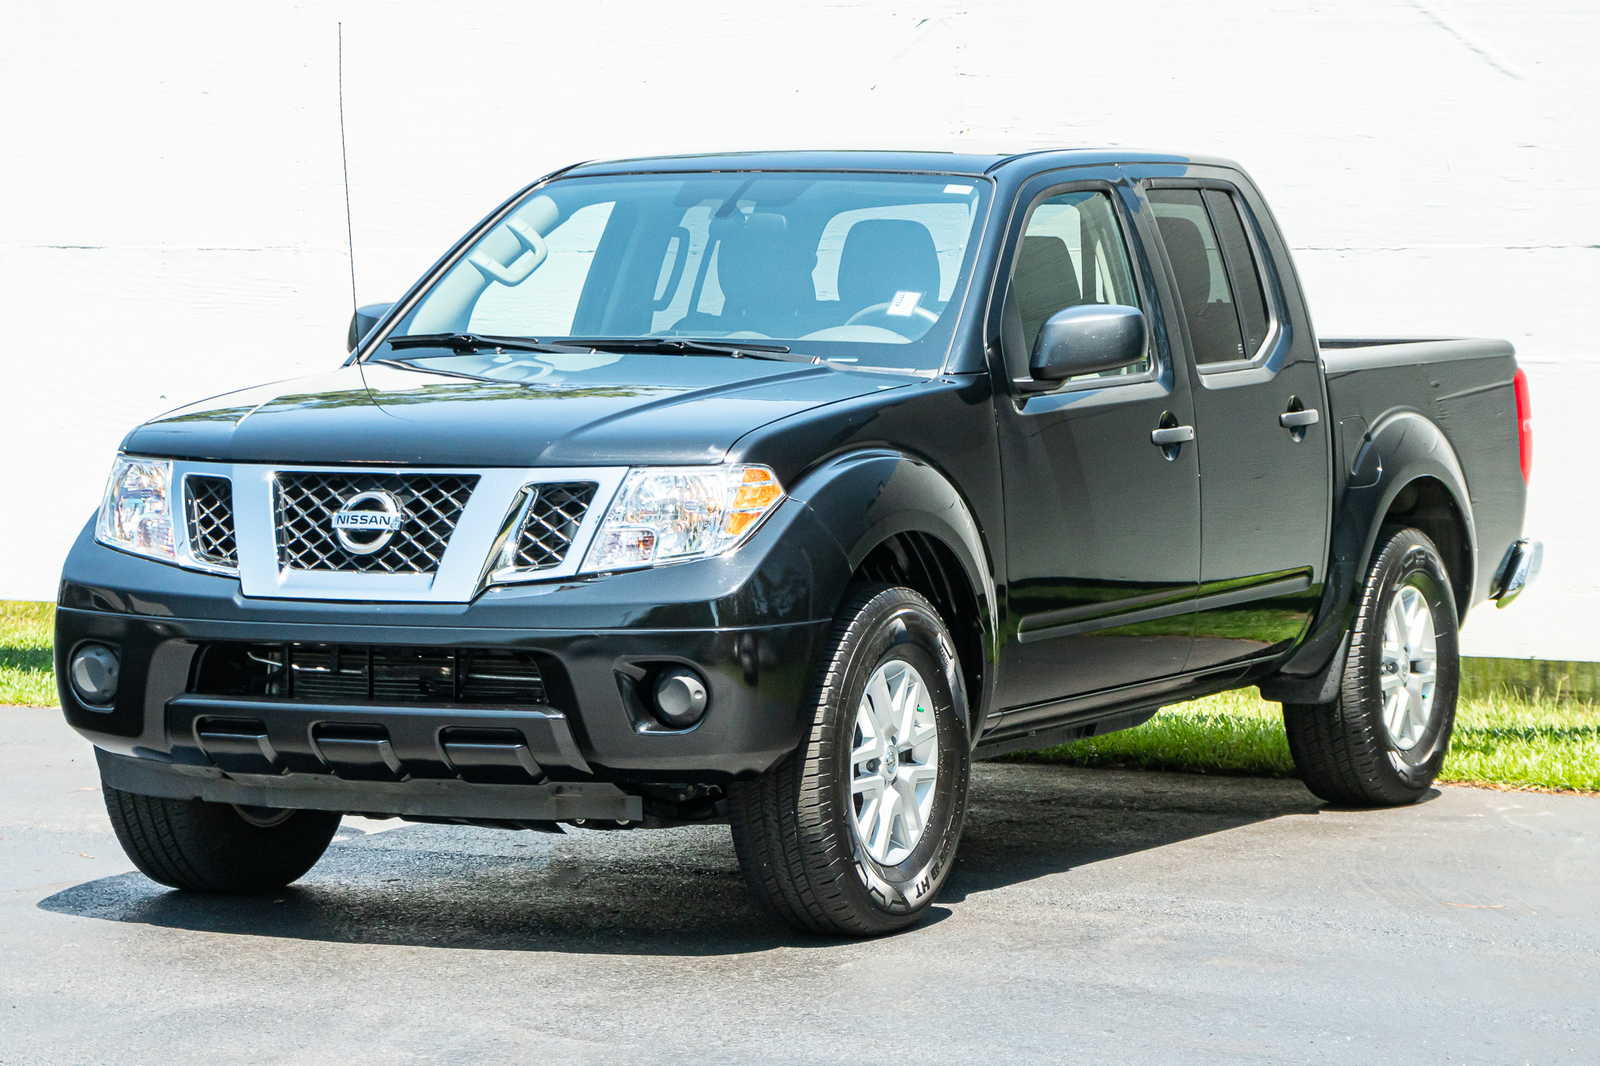 Certified PreOwned 2019 Nissan Frontier Crew Cab 4x2 SV